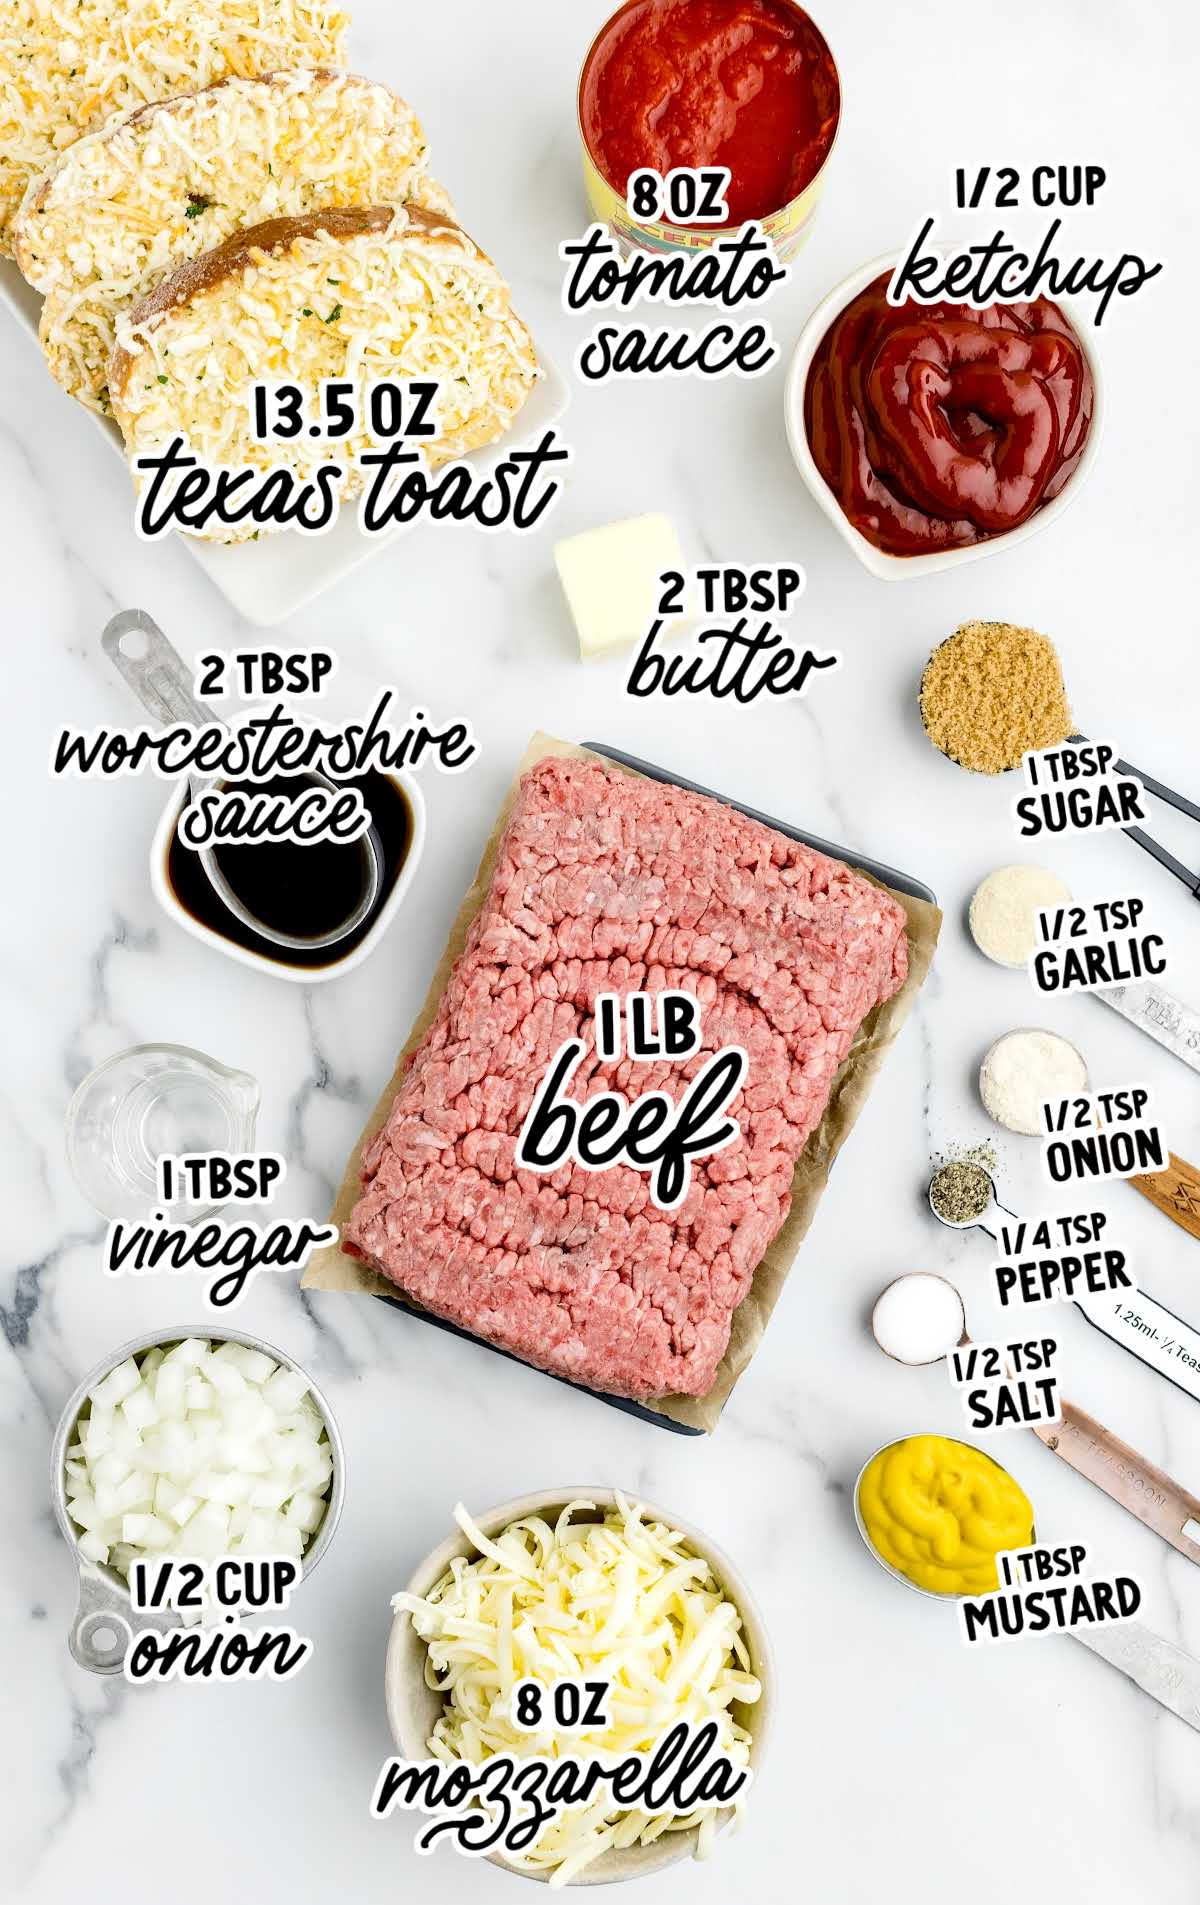 Texas Toast Sloppy Joes raw ingredients that are labeled